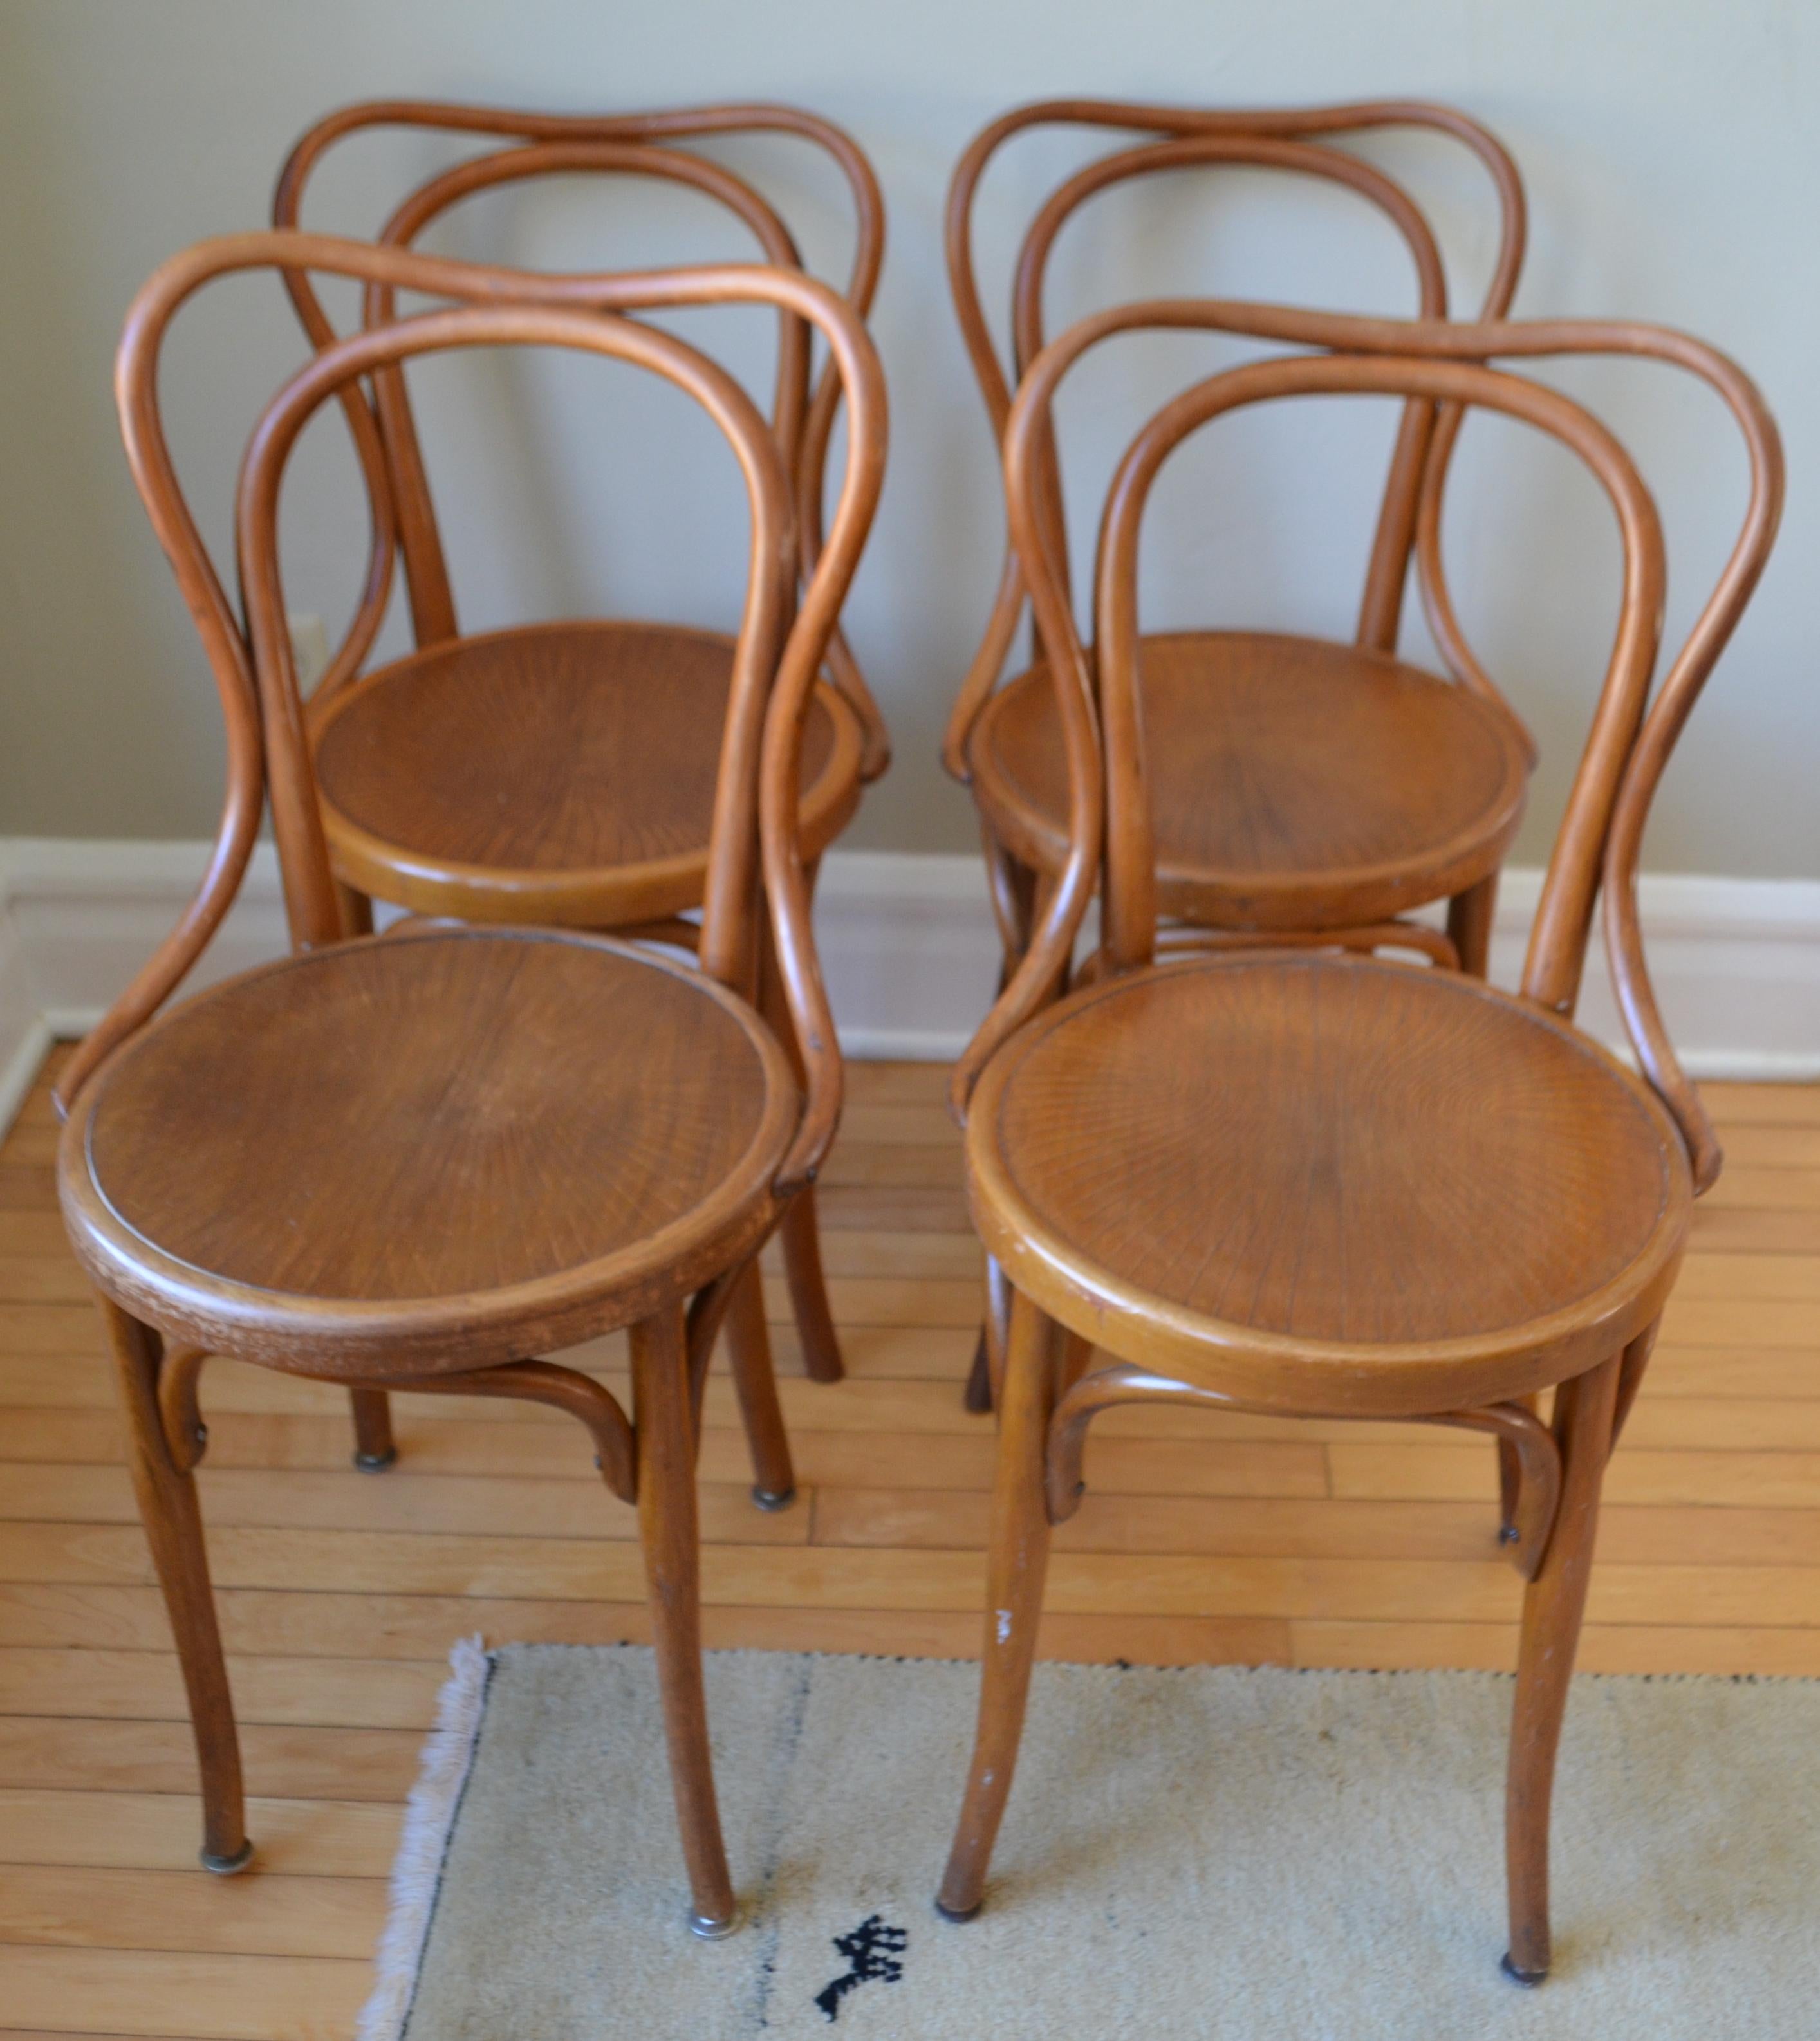 Bistro dining chairs from Jacob and Joseph Kohn. Made from bentwood beech with pressed seats. Date from the early 1900s. All in good original vintage condition, with some signs of wear to the embossed seats. They retain the original finish, nicely